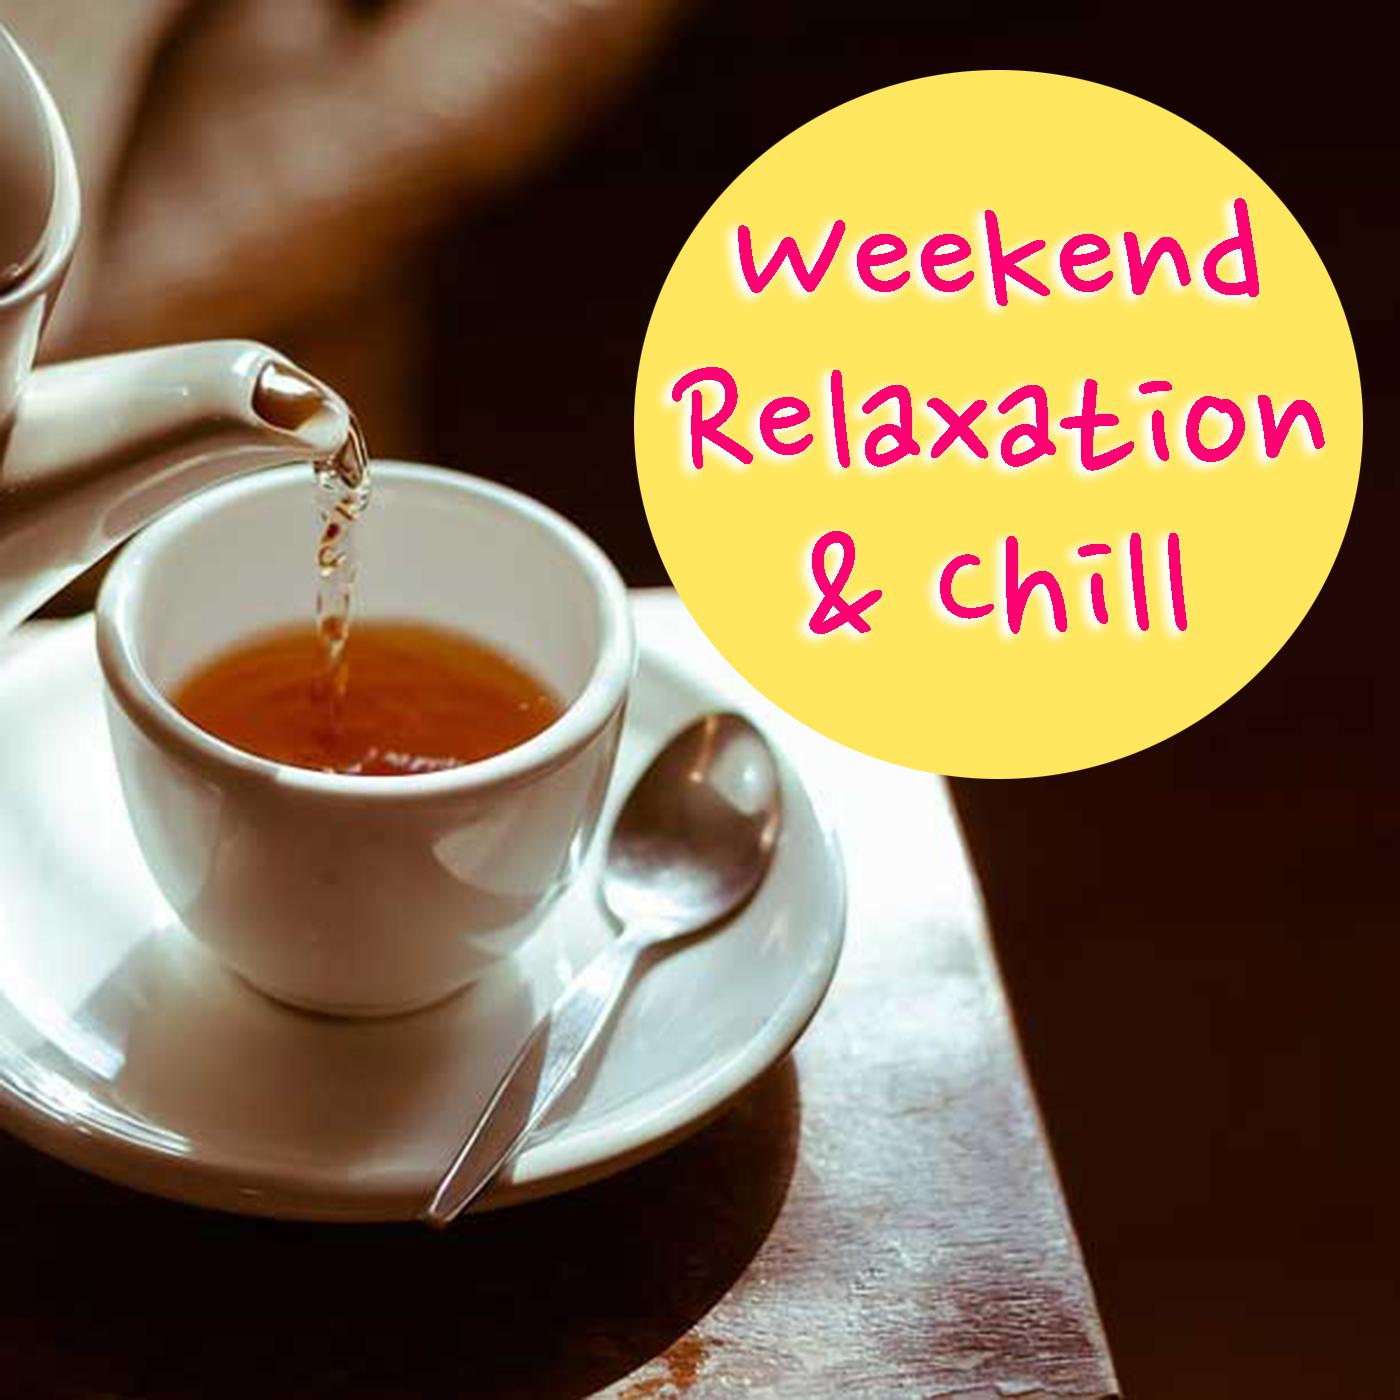 Weekend Relaxation & Chill